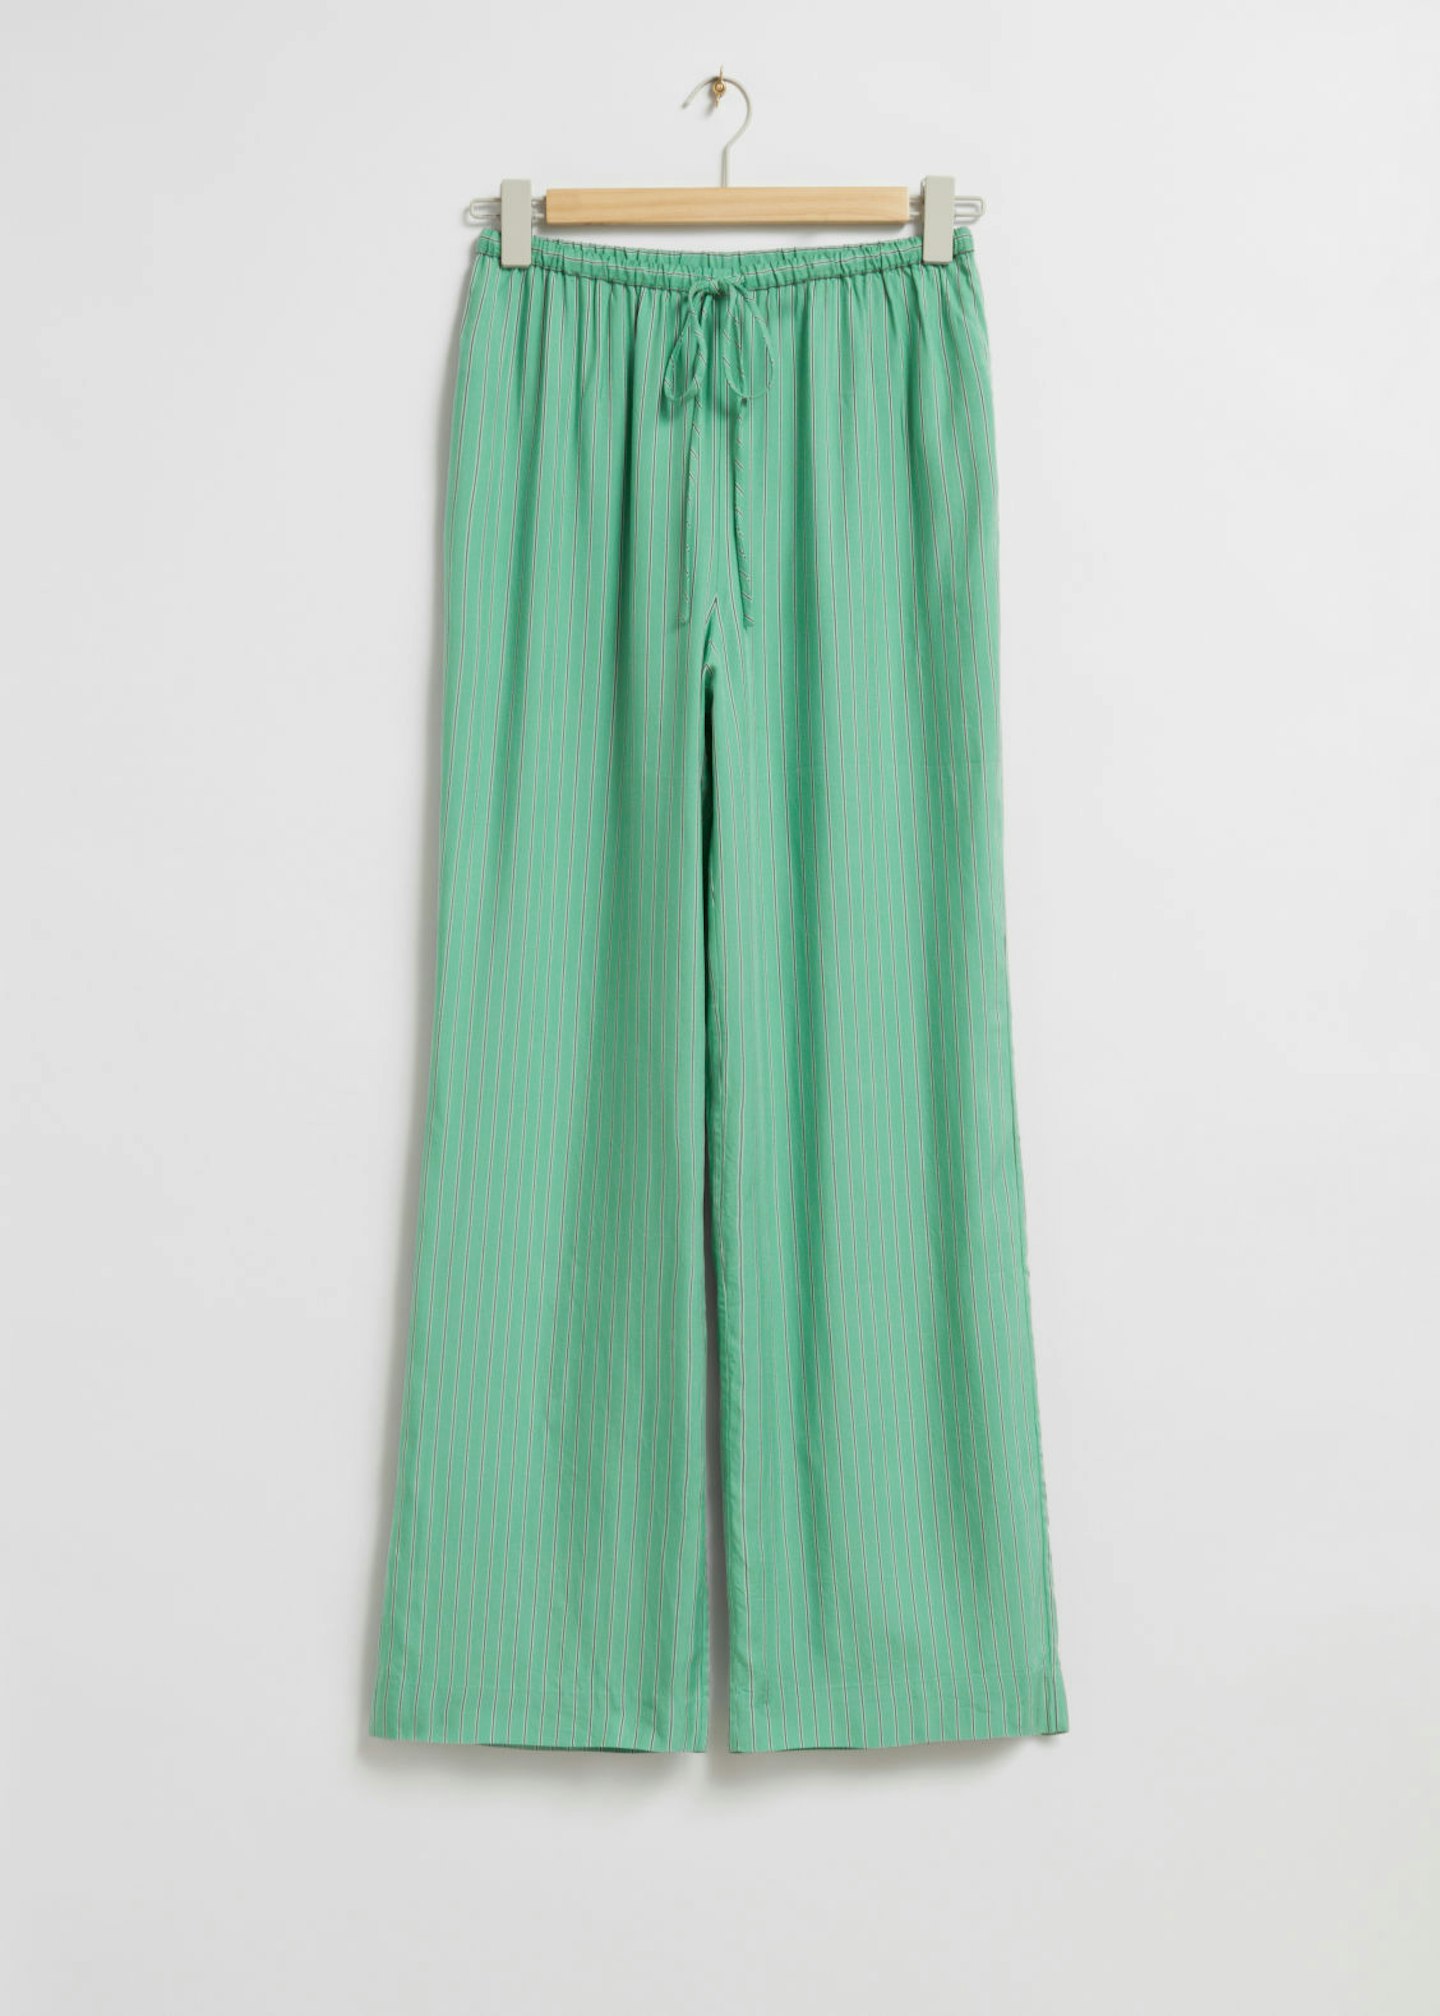 & Other Stories, Loose-Fit Drawstring Trousers